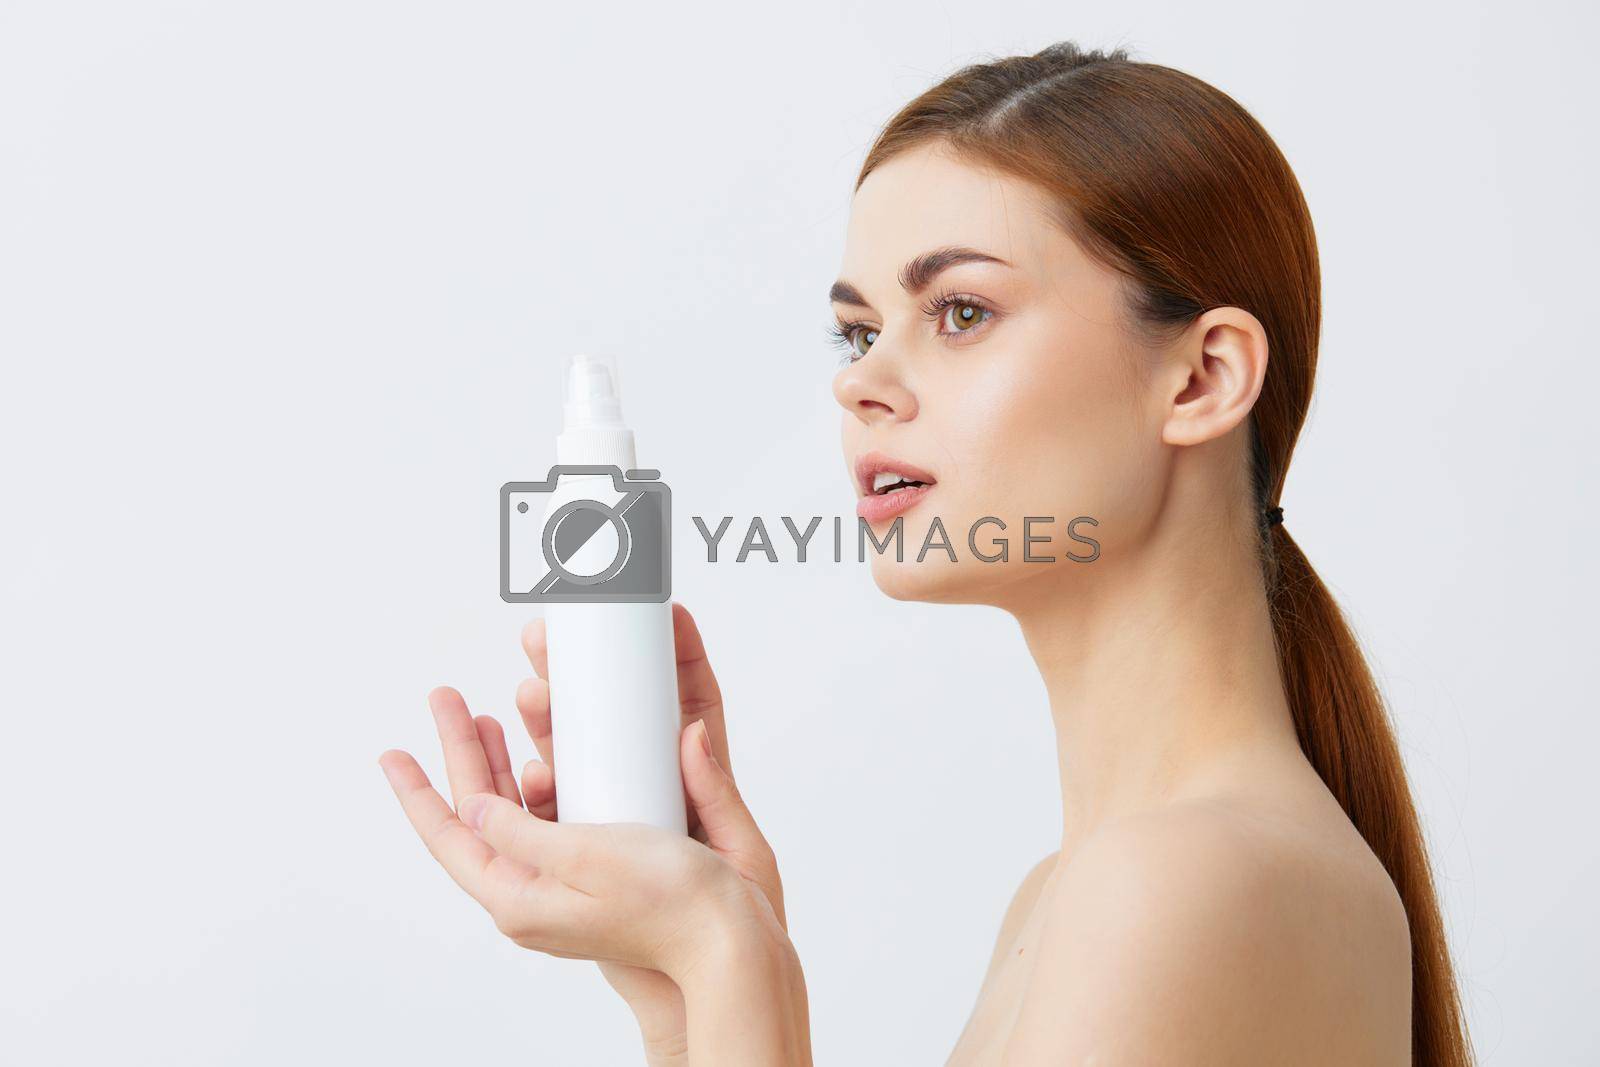 Royalty free image of woman body lotion rejuvenation cosmetics close-up Lifestyle by SHOTPRIME